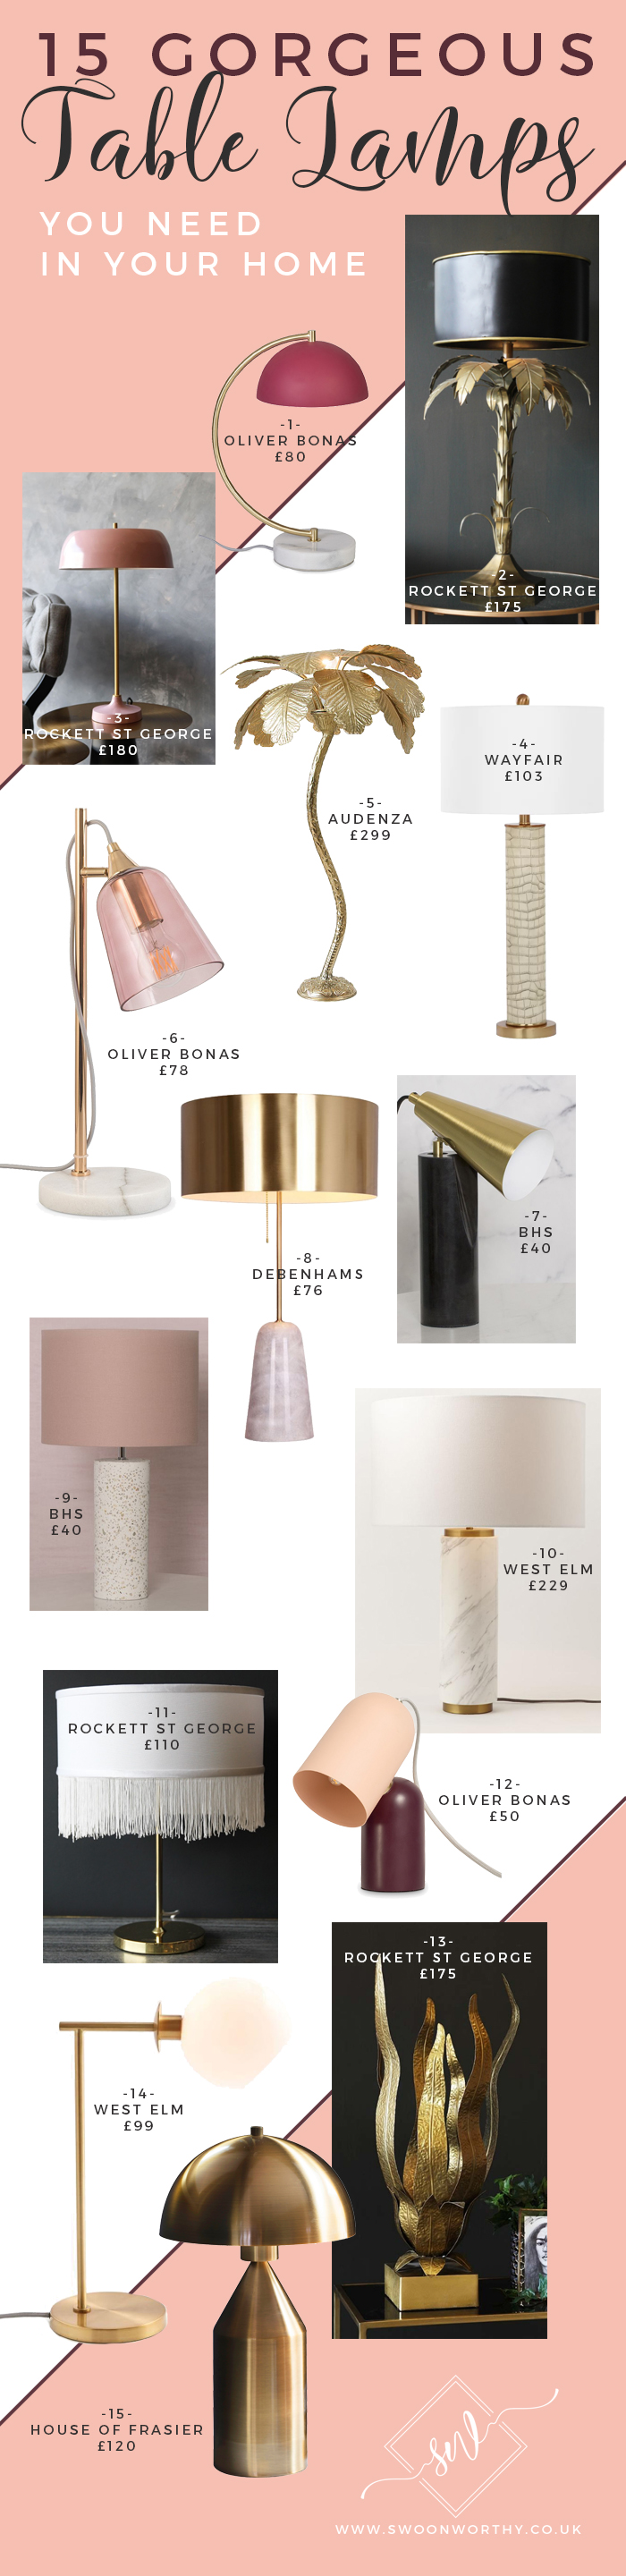 15 Gorgeous Table Lamps You Need In Your Home